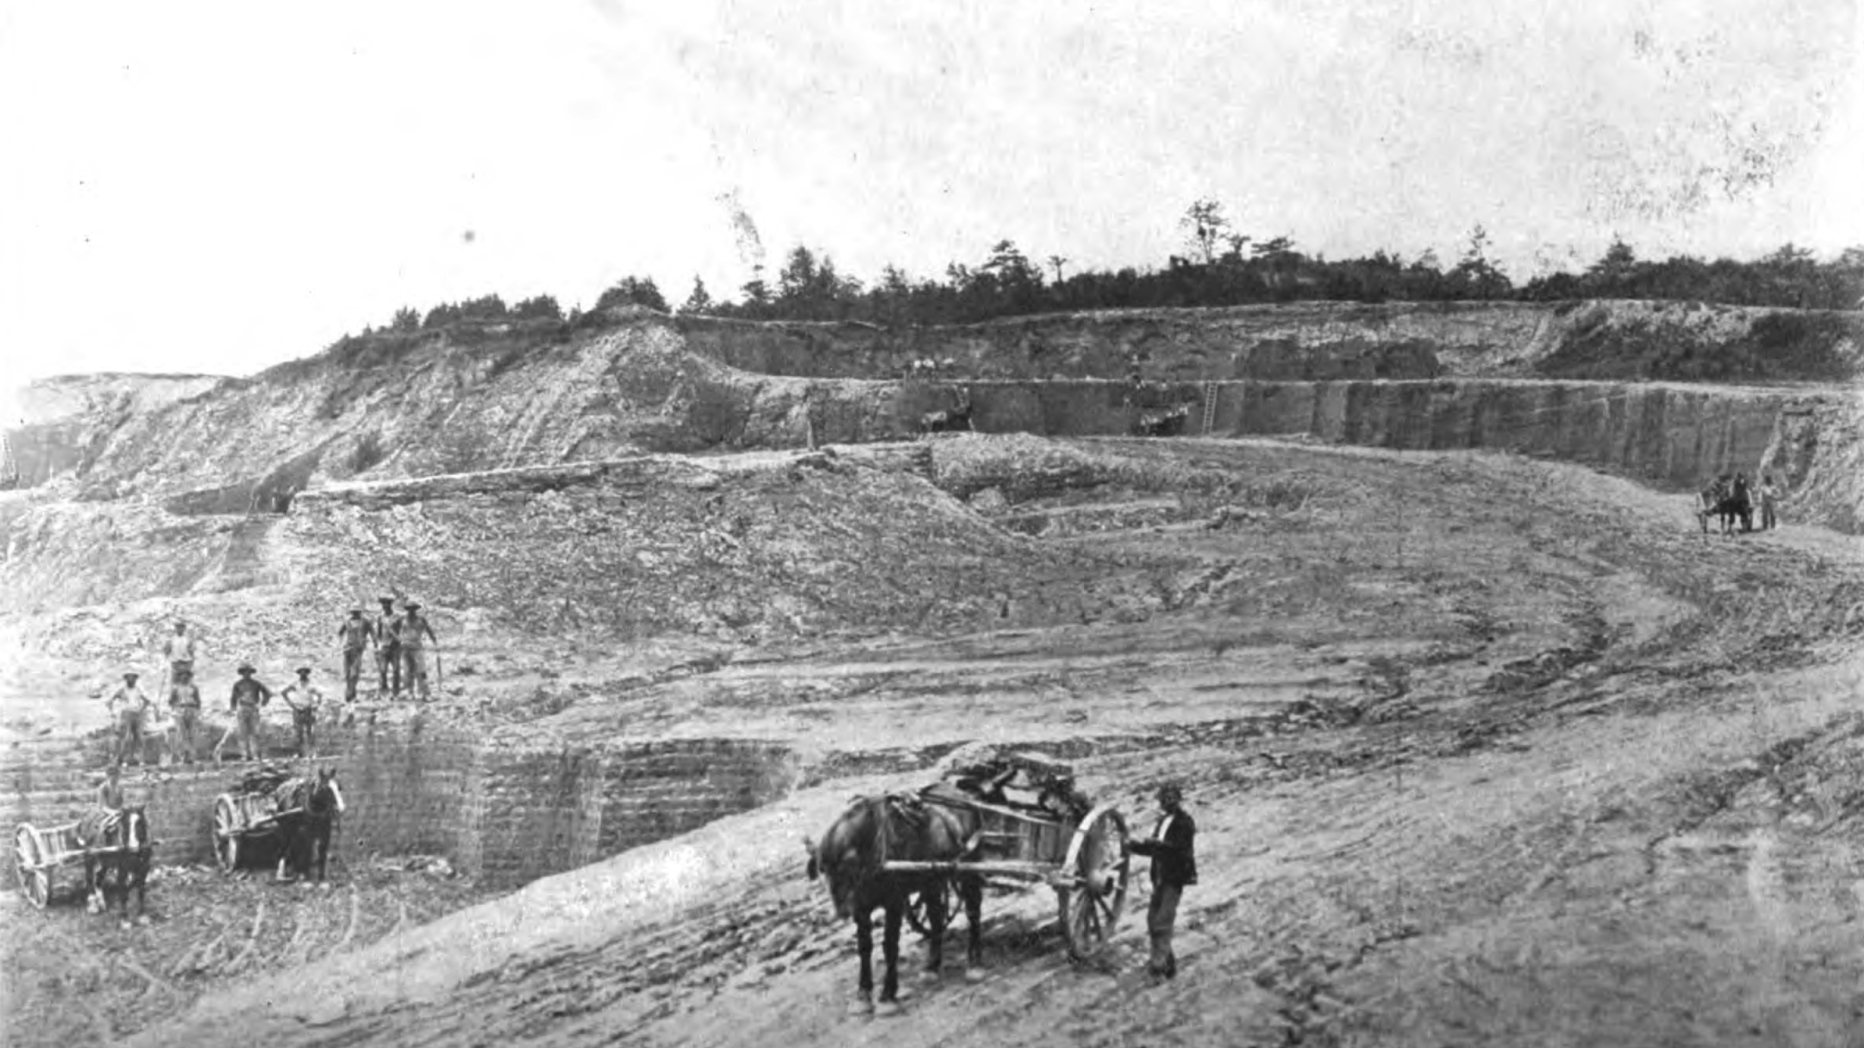 B&W photo of mule carting clay out of clay quarry